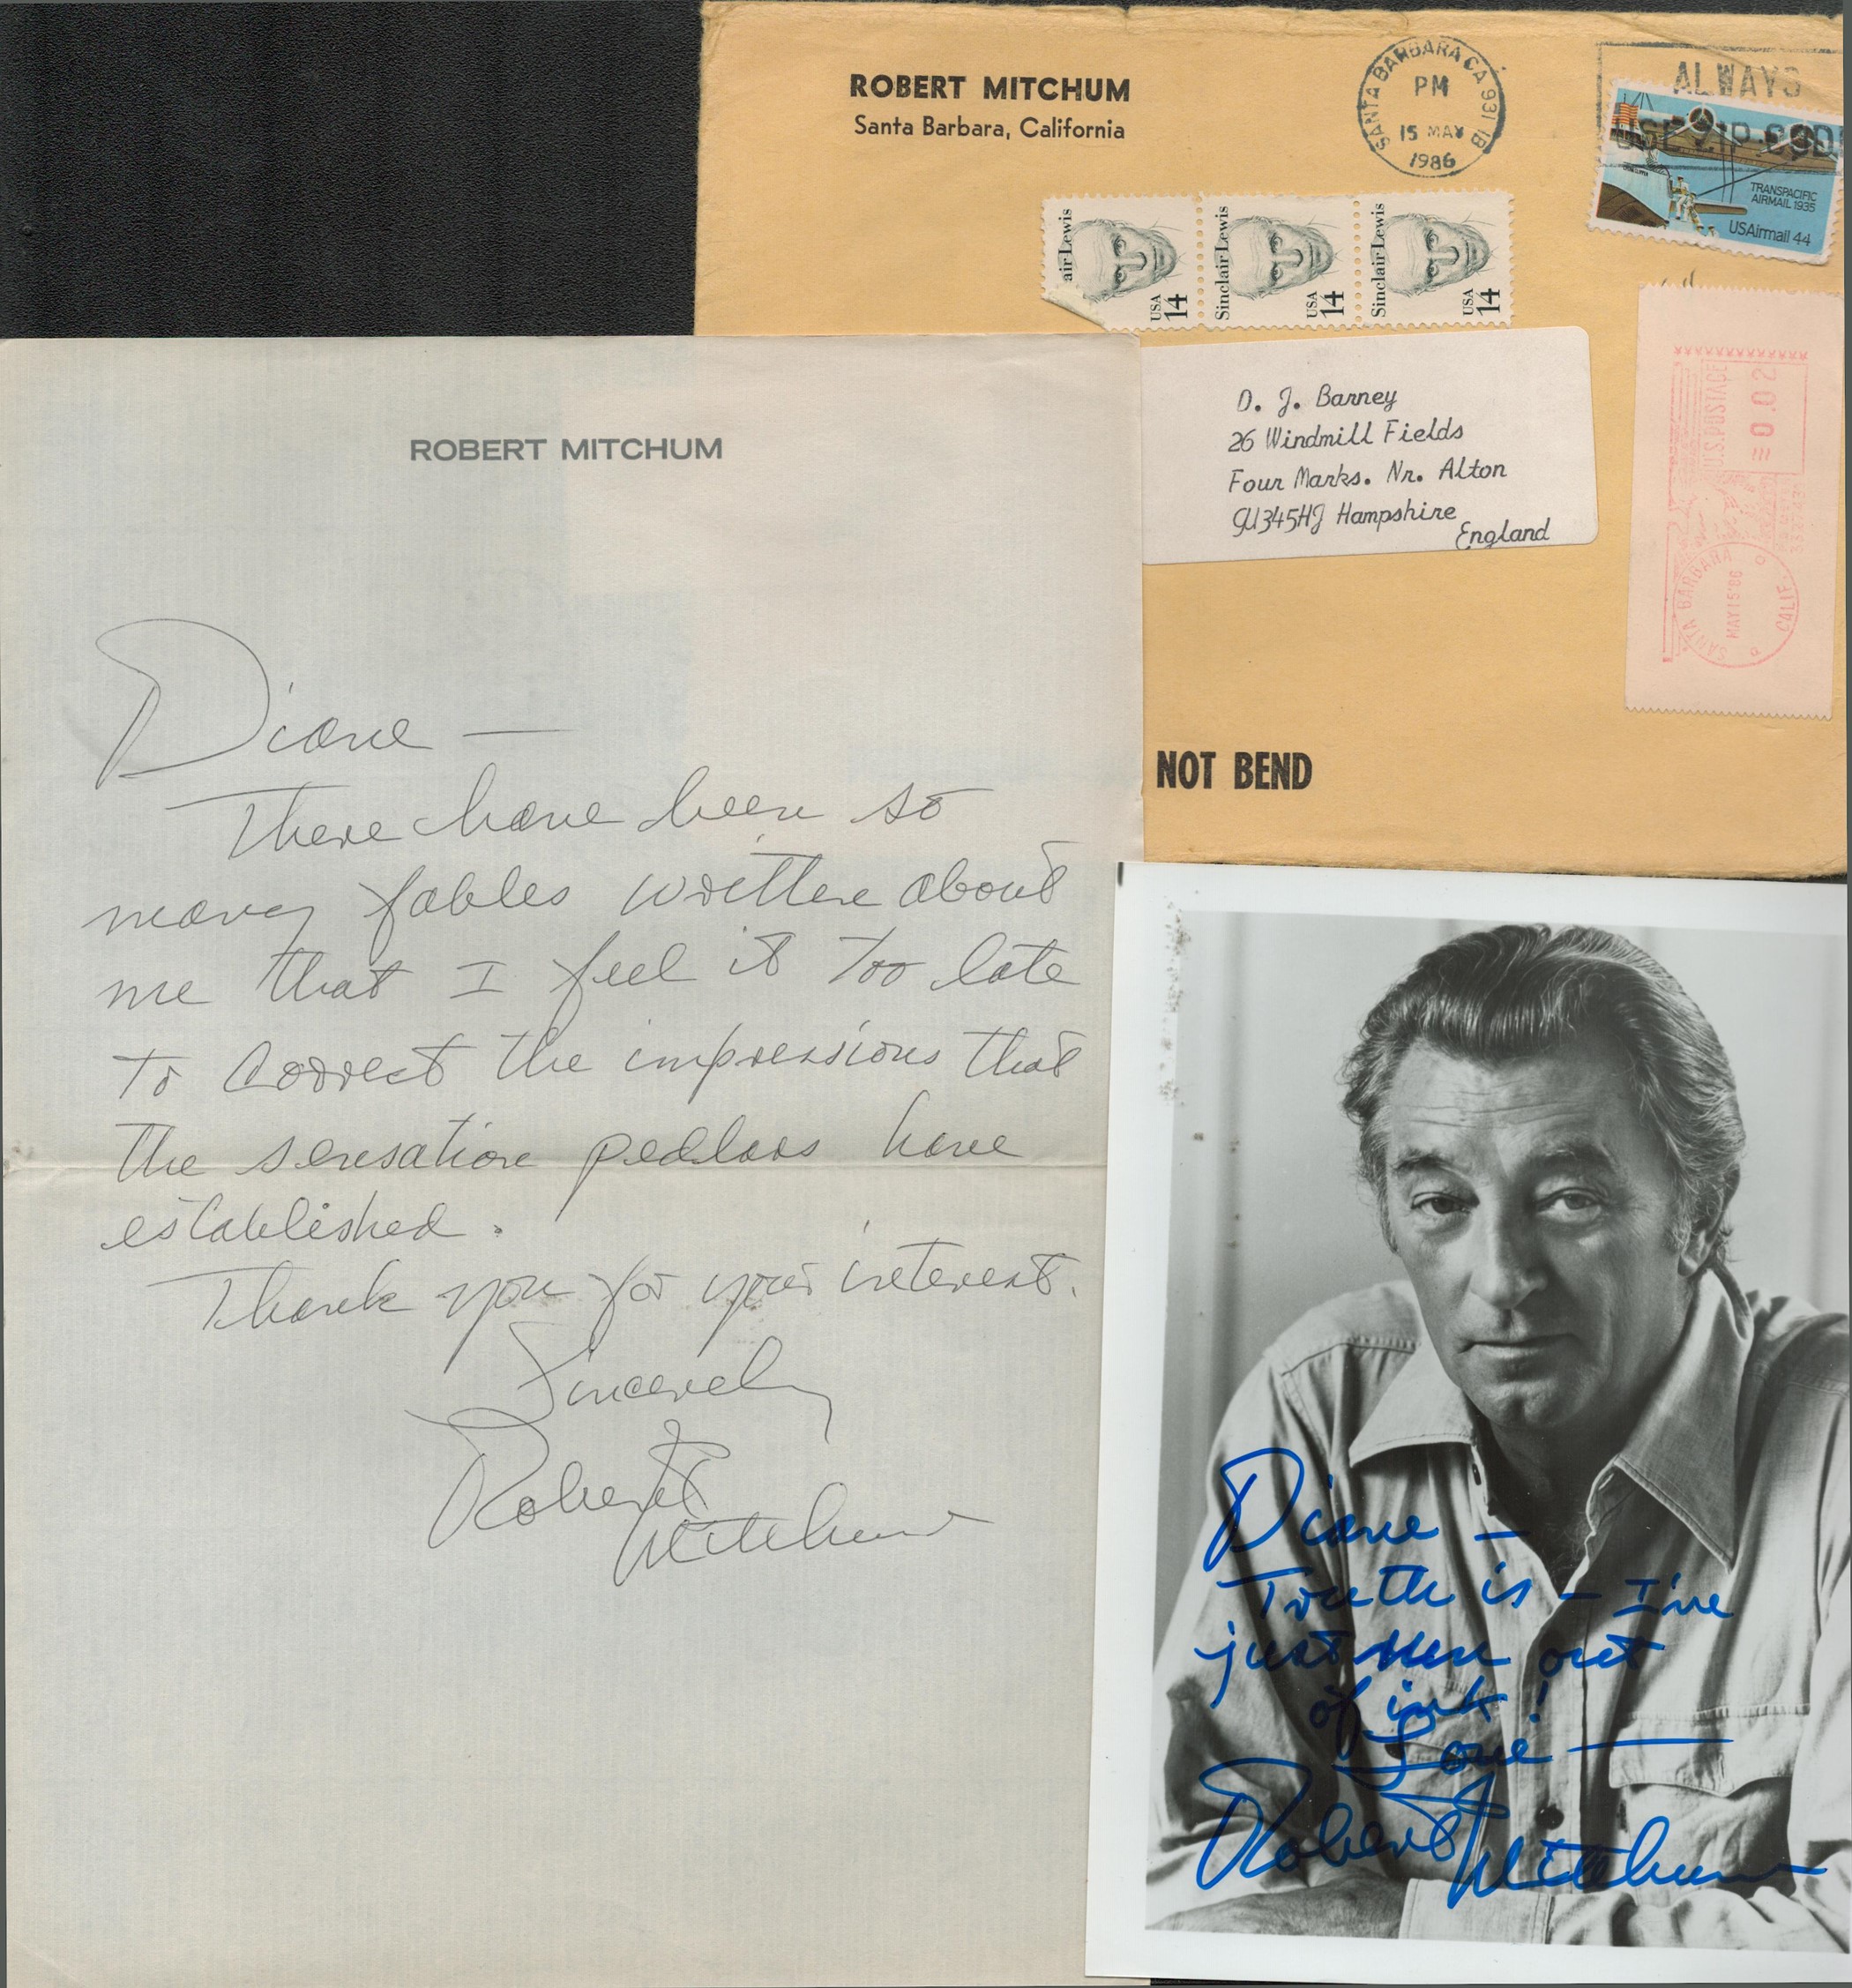 Robert Mitchum large ALS (undated but from May 1986 as per mailing envelope) with interesting